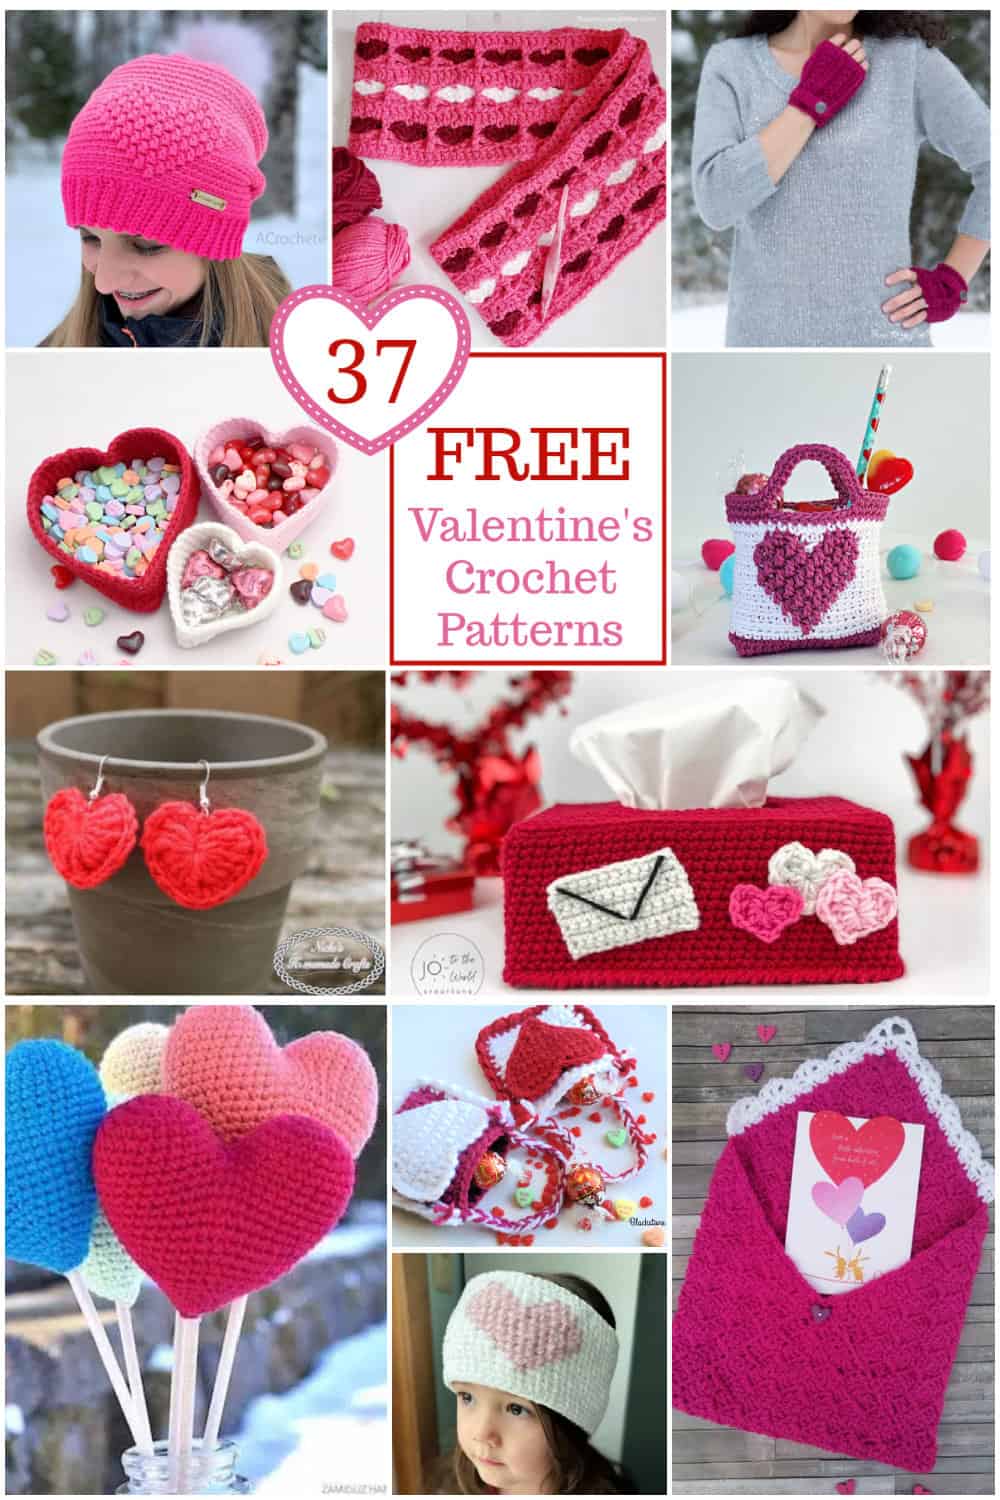 Valentine's crochet patterns such as heart earrings, crochet treat bags, heart nesting bowls, head warmers, mittens and more.